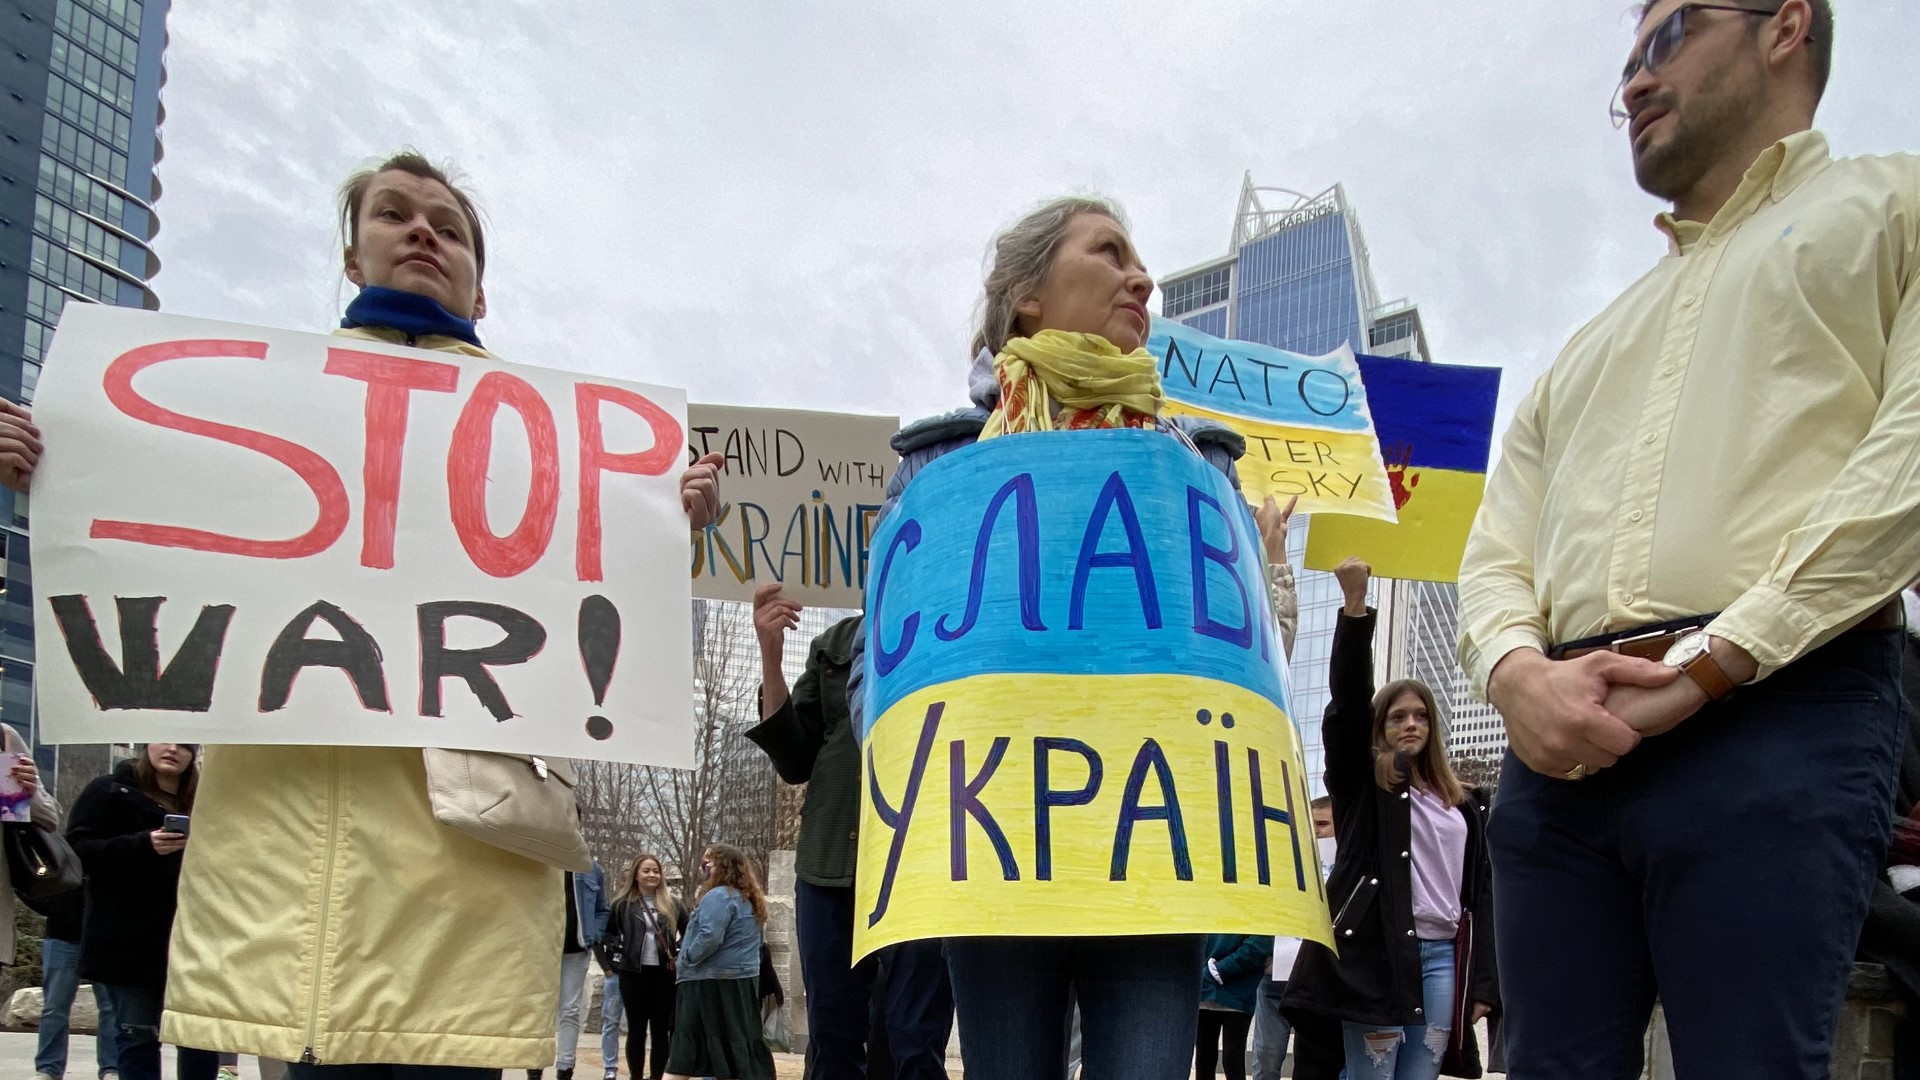 AS Russia's invasion of Ukraine continues, support is growing for Ukraine and its people here in Charlotte.